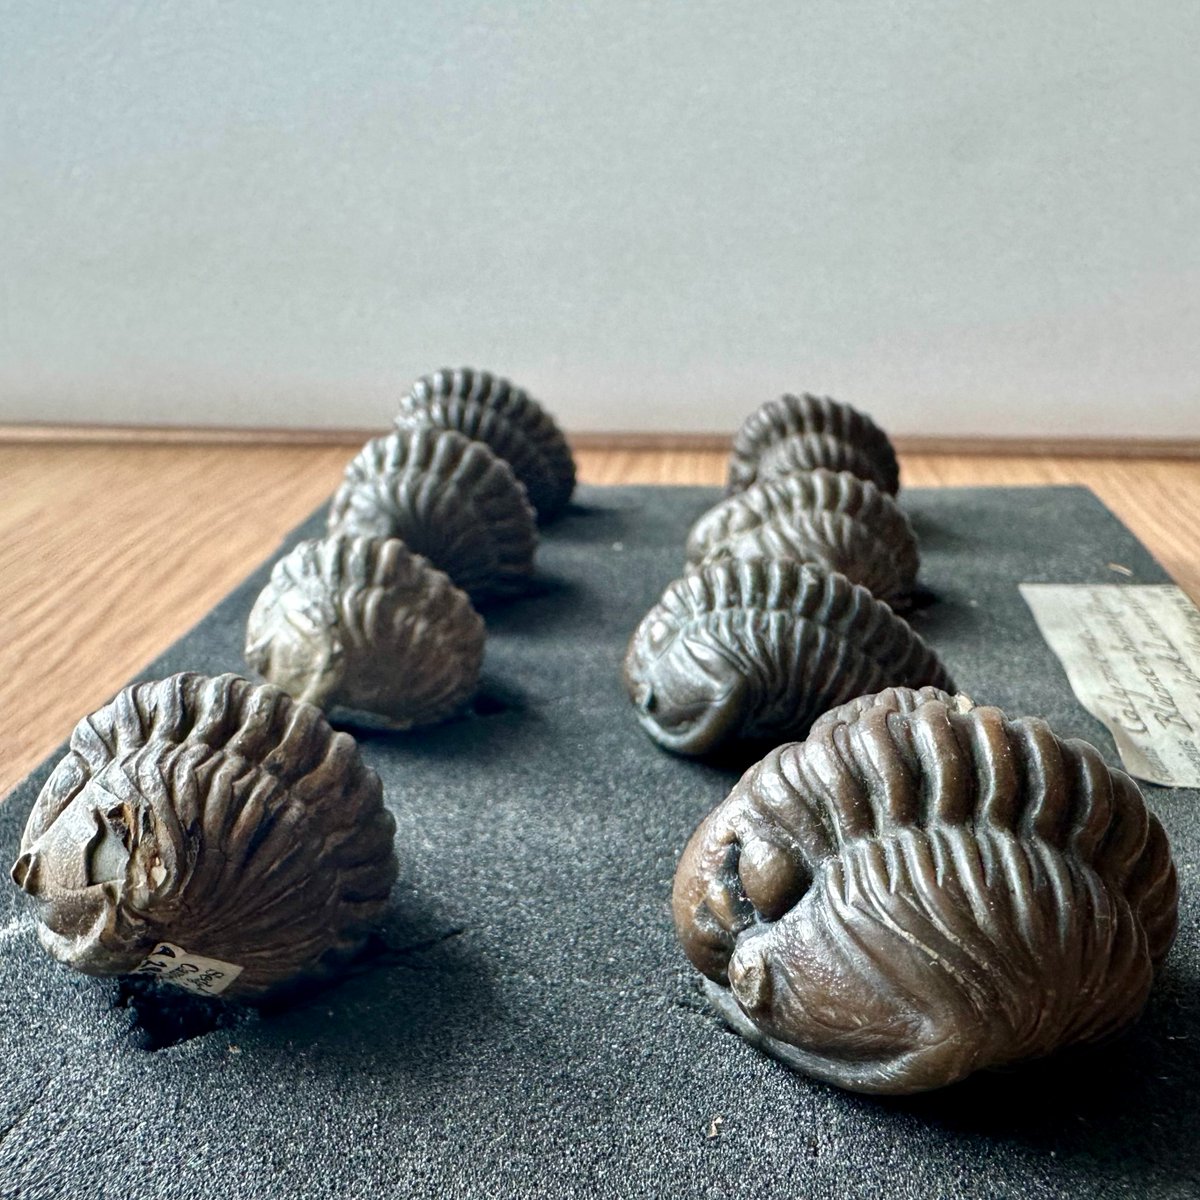 What do trilobites, woodlice and hedgehogs have in common?! They can all curl up into a ball when threatened (or trilobites did, before going extinct 252 million years ago). These curled Calymene trilobites, known as ‘dudley bugs’, are around 425 million years old. #FossilFriday